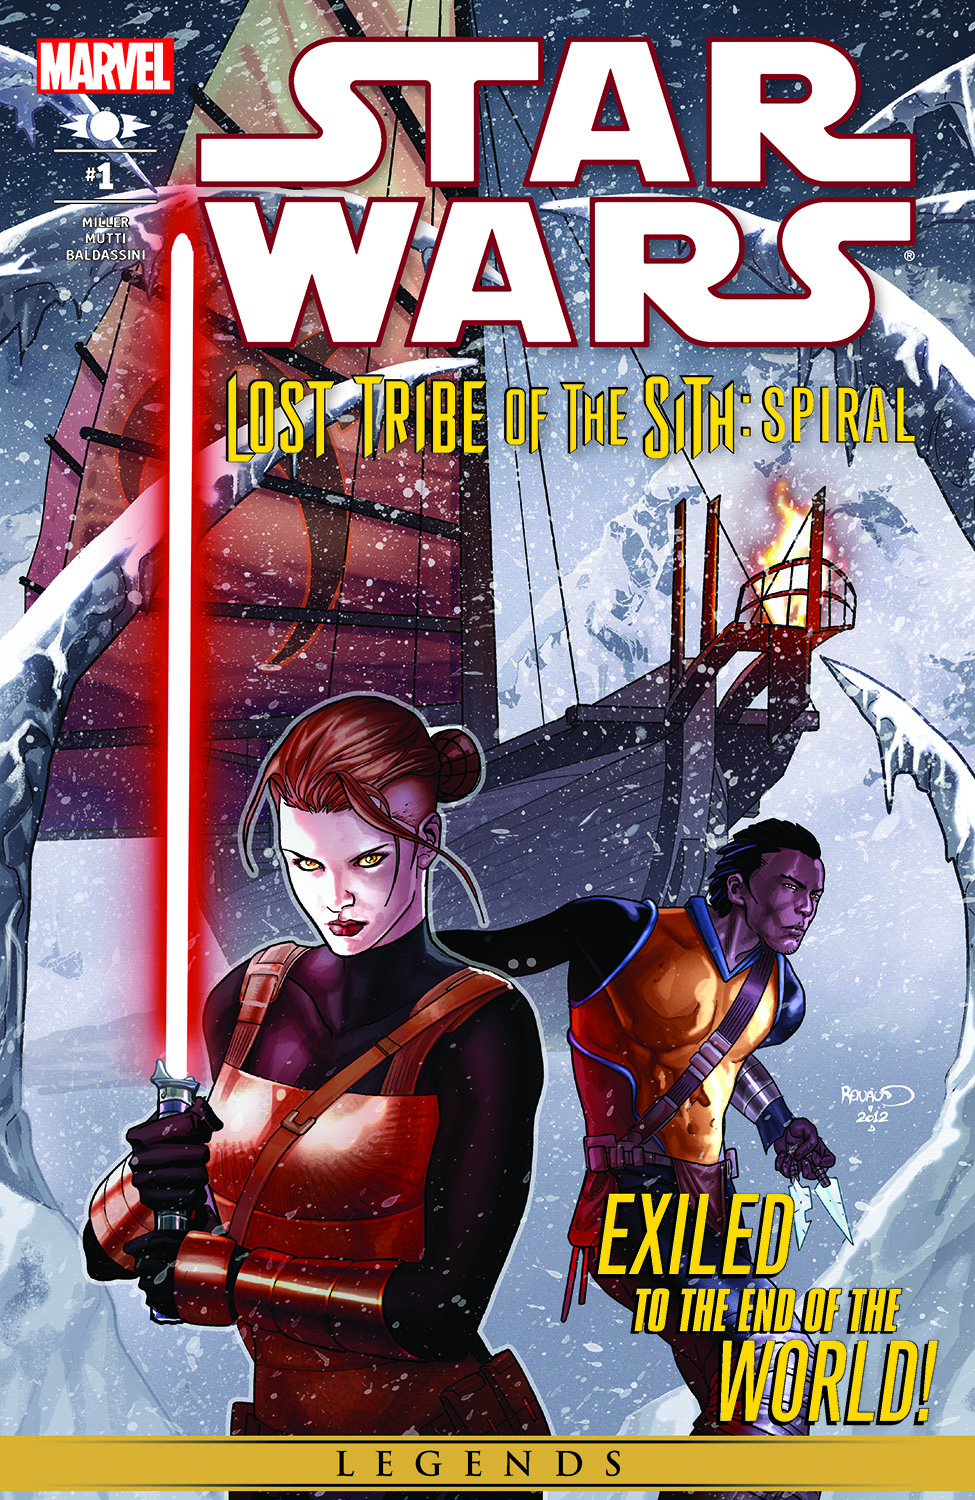 Star Wars: Lost Tribe of the Sith - Spiral (2012) #1